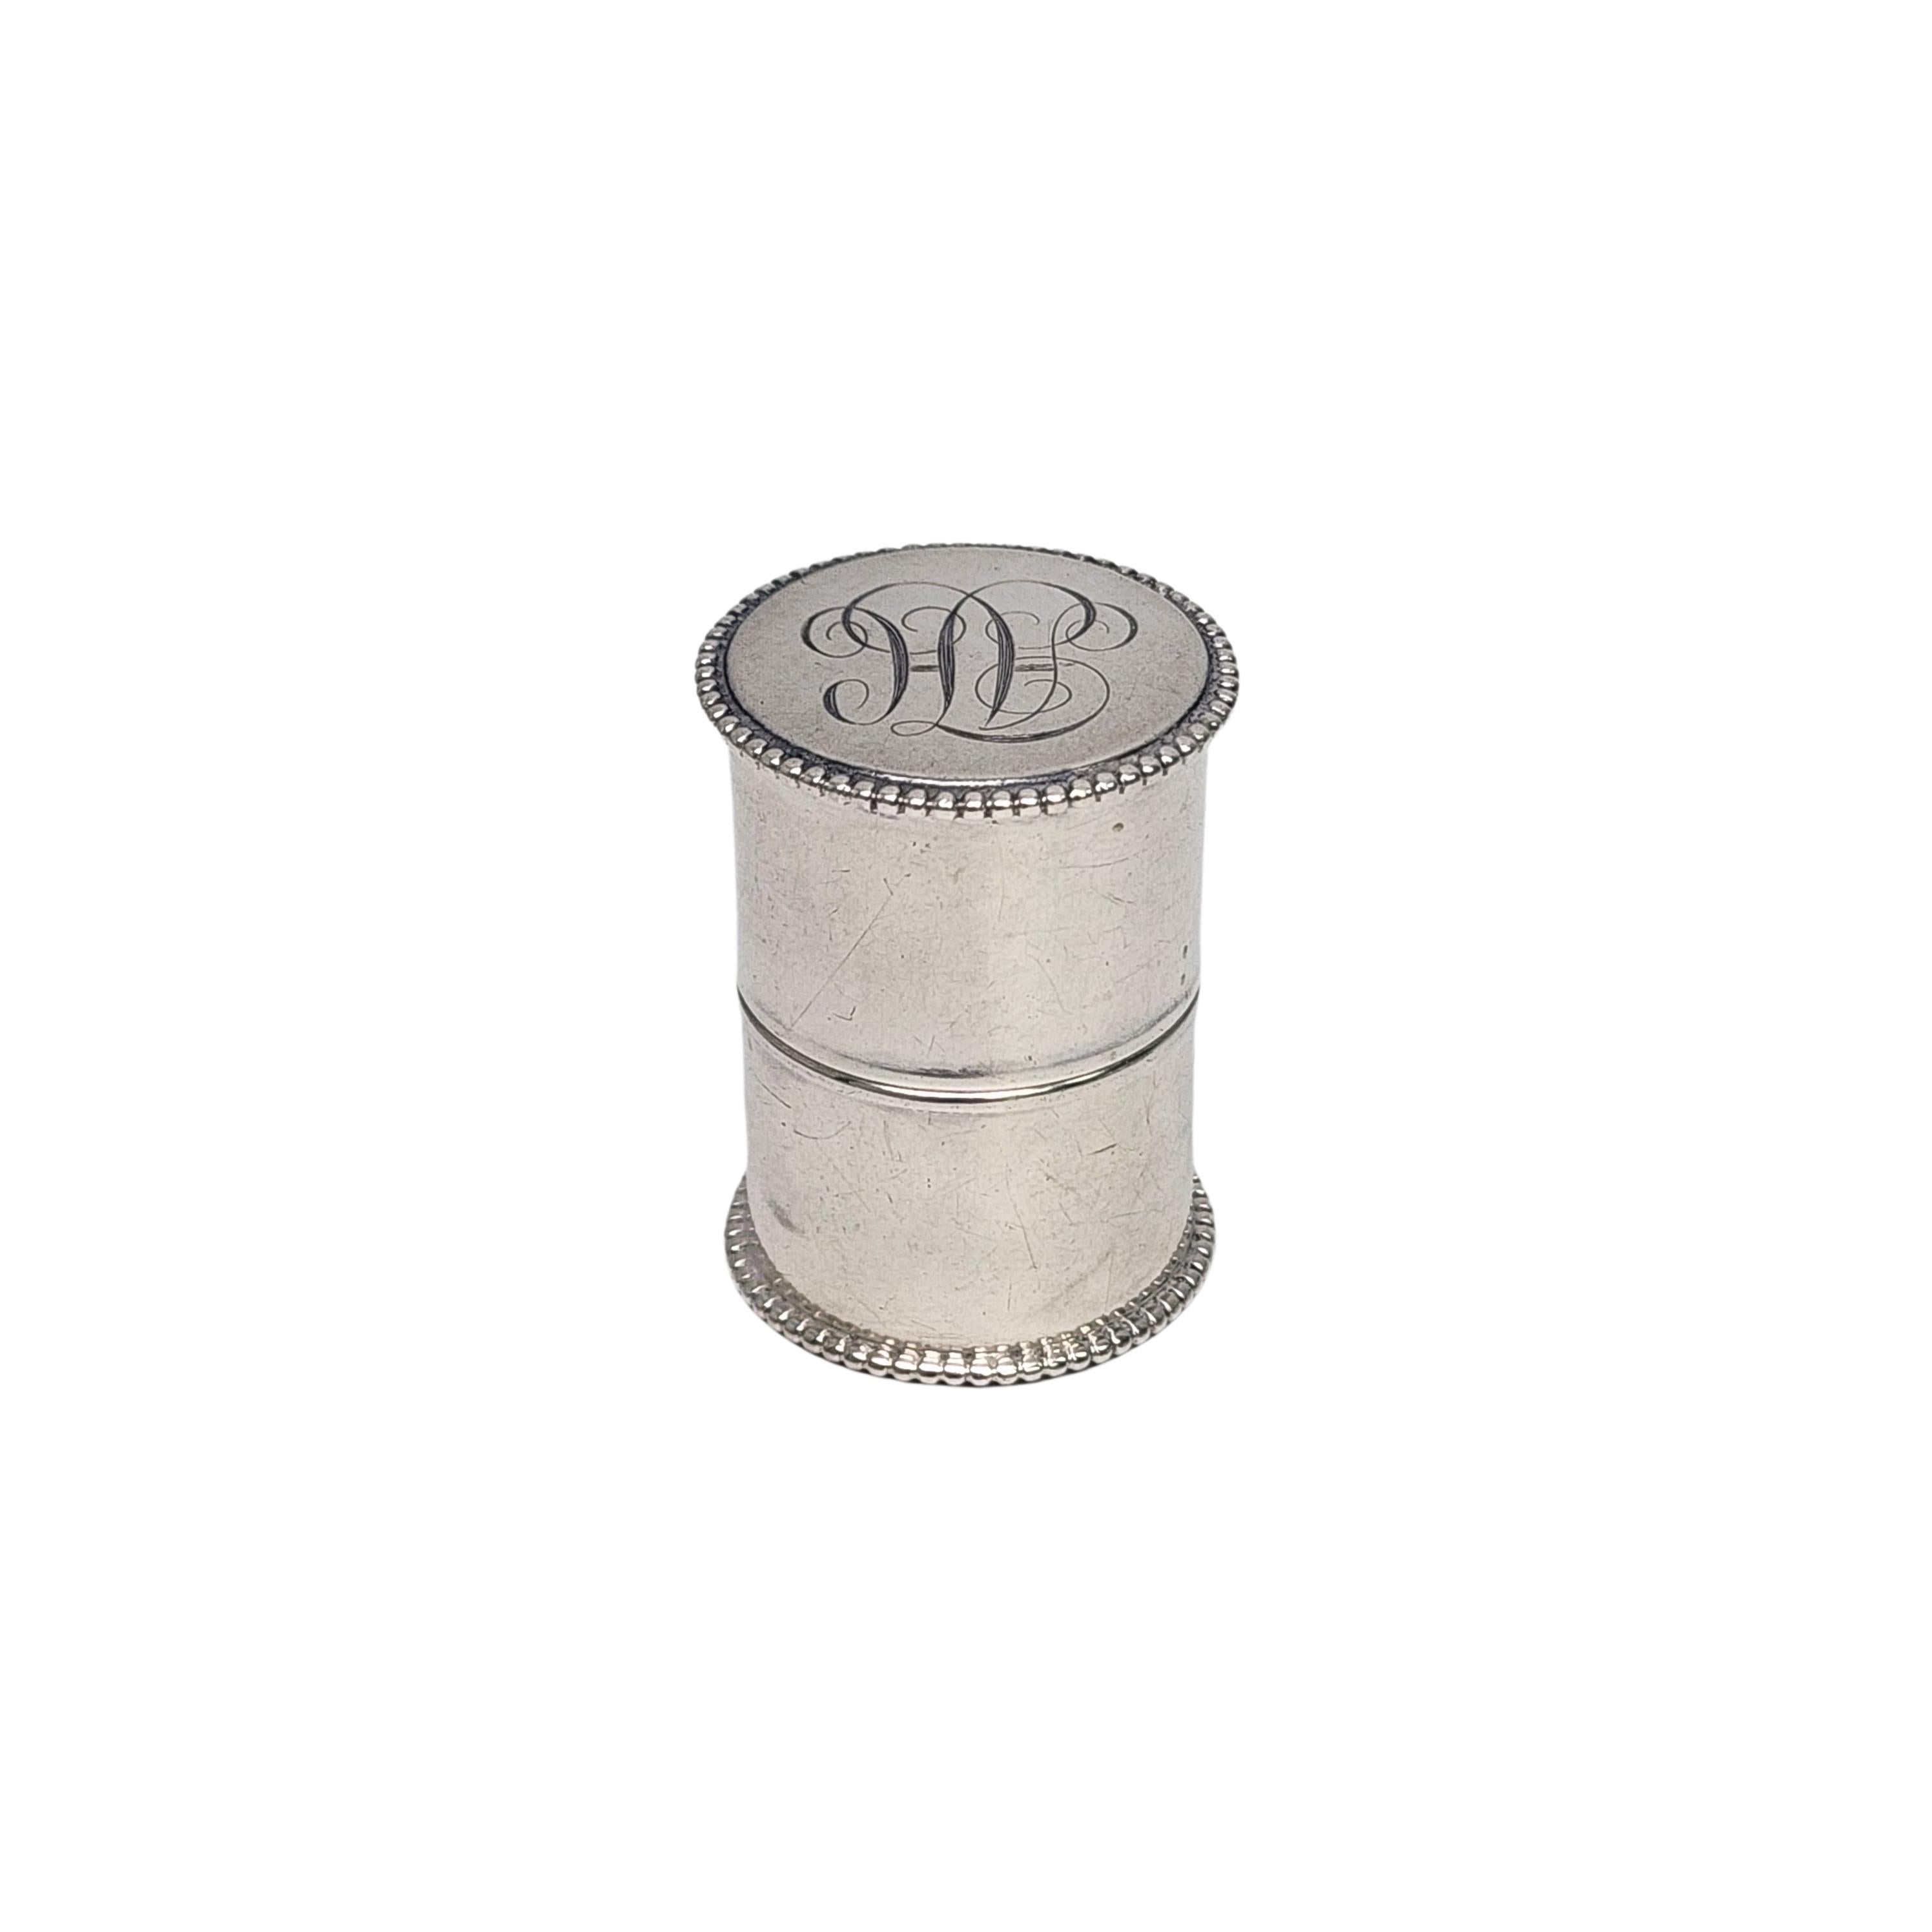 Antique Sterling Silver Thread Case with Monogram #16524 In Good Condition For Sale In Washington Depot, CT